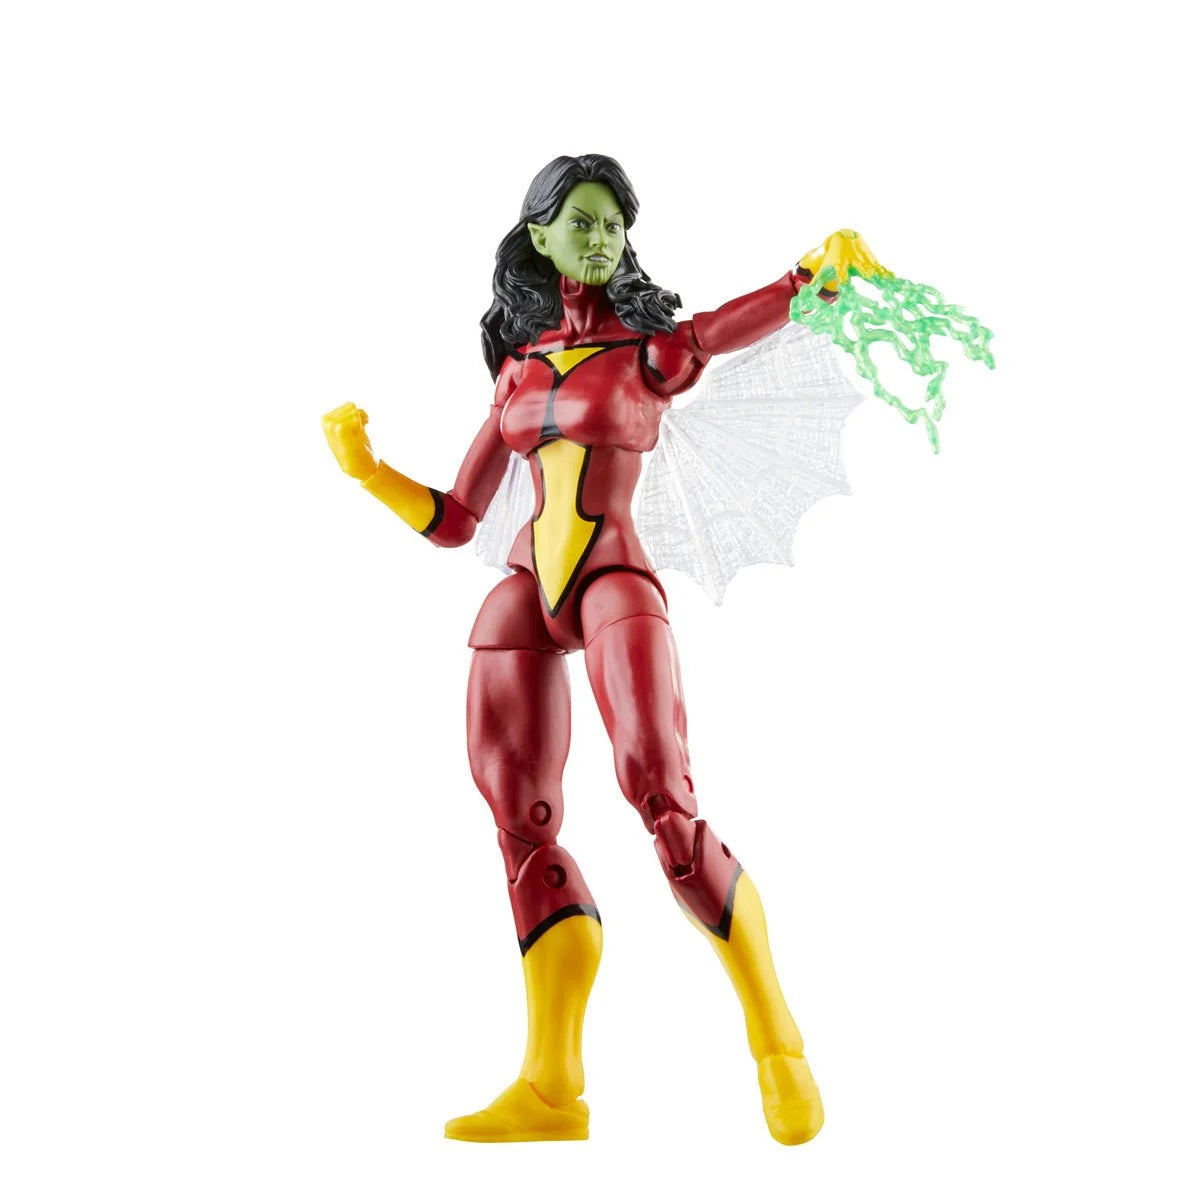 Avengers 60th Anniversary Marvel Legends Skrull Queen and Super-Skrull 6-Inch Action Figures - Heretoserveyou